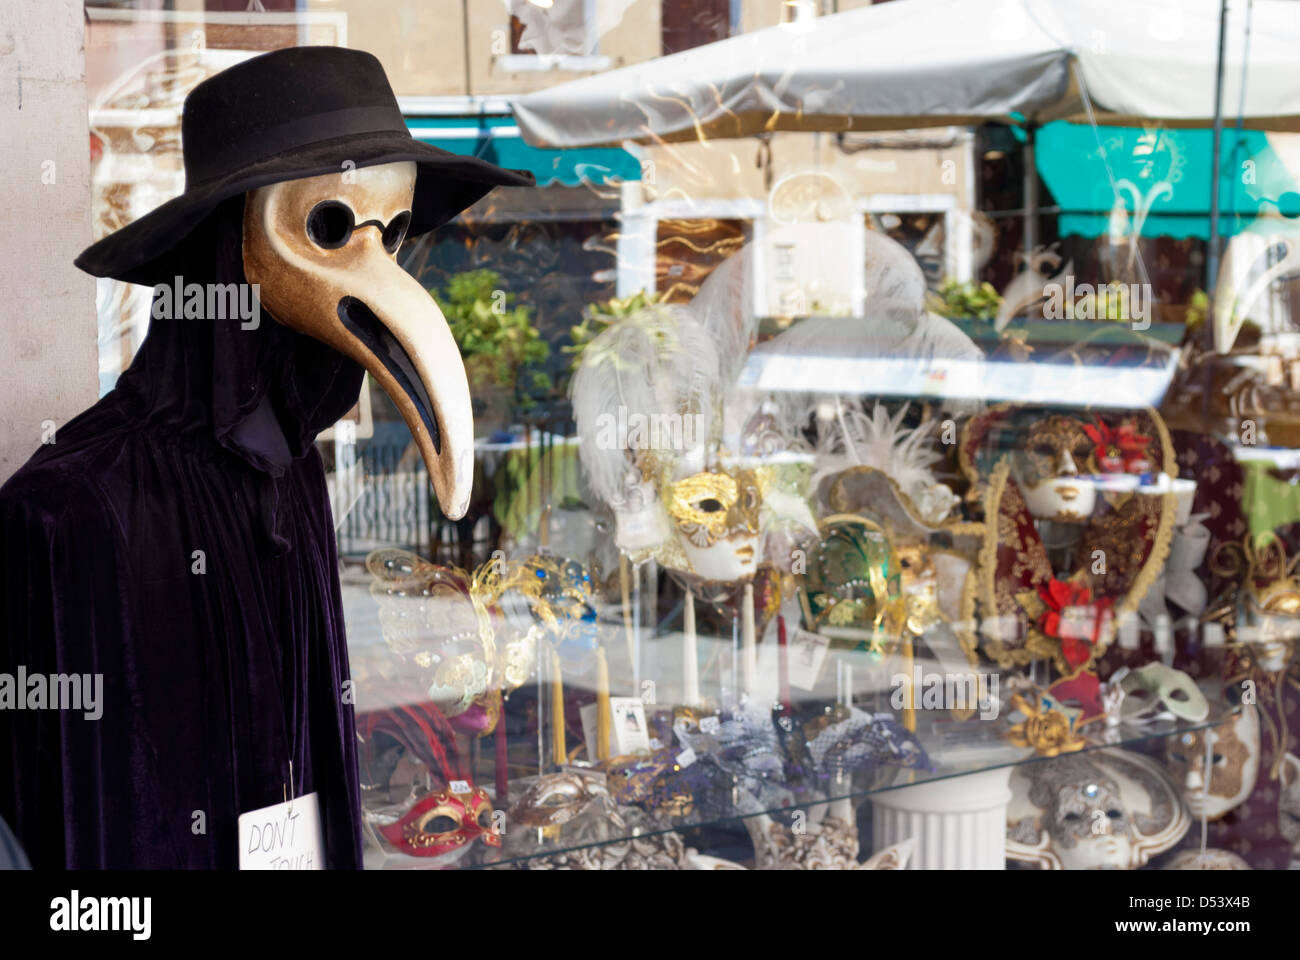 Plague Doctor Mask Costume at a Store Front in Venice Italy Stock Photo